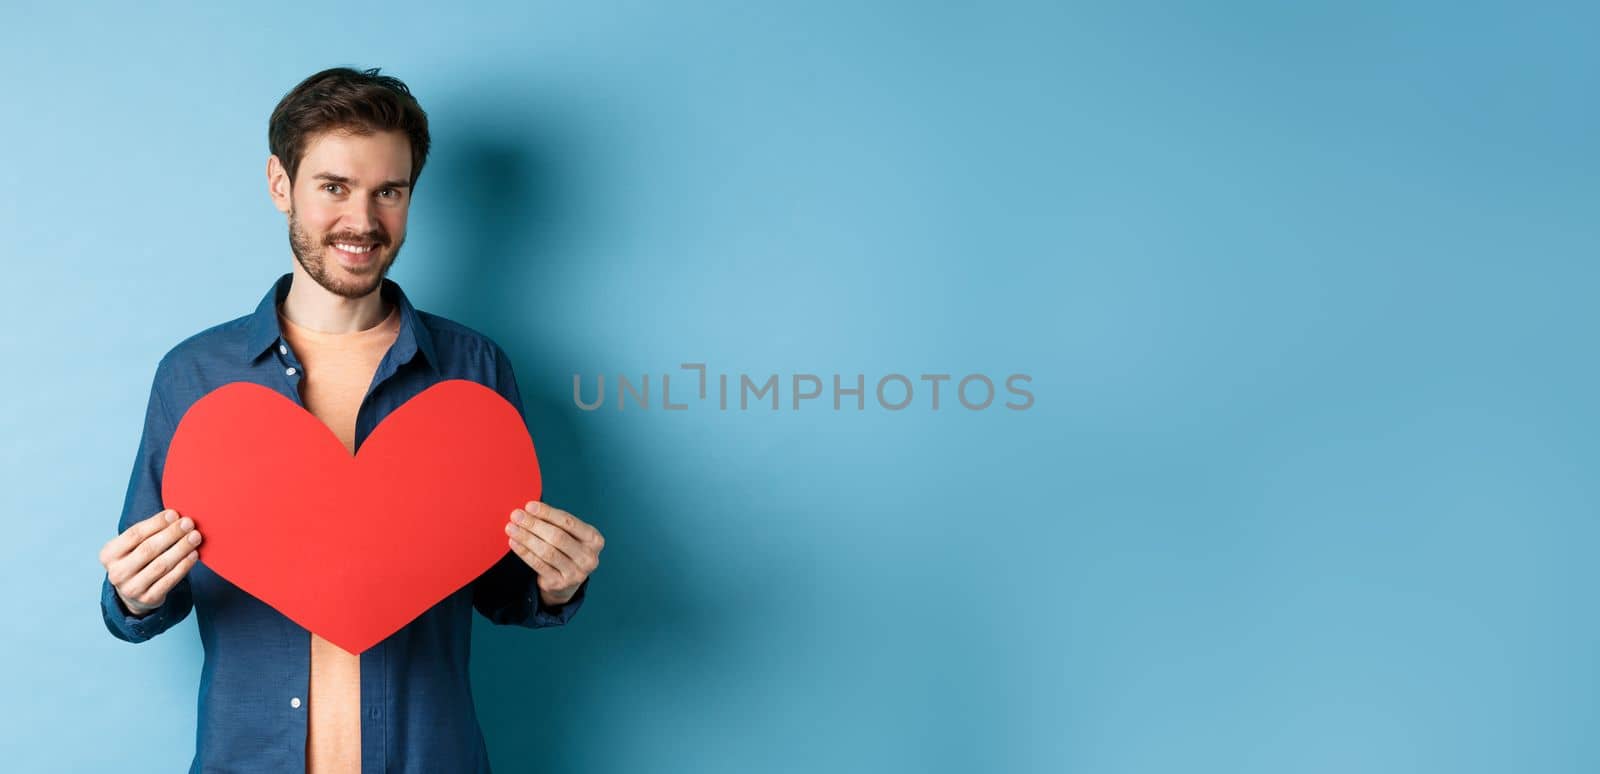 Handsome young man smiling, showing big red heart postcard for Valentines day, looking at camera happy, standing against blue background.